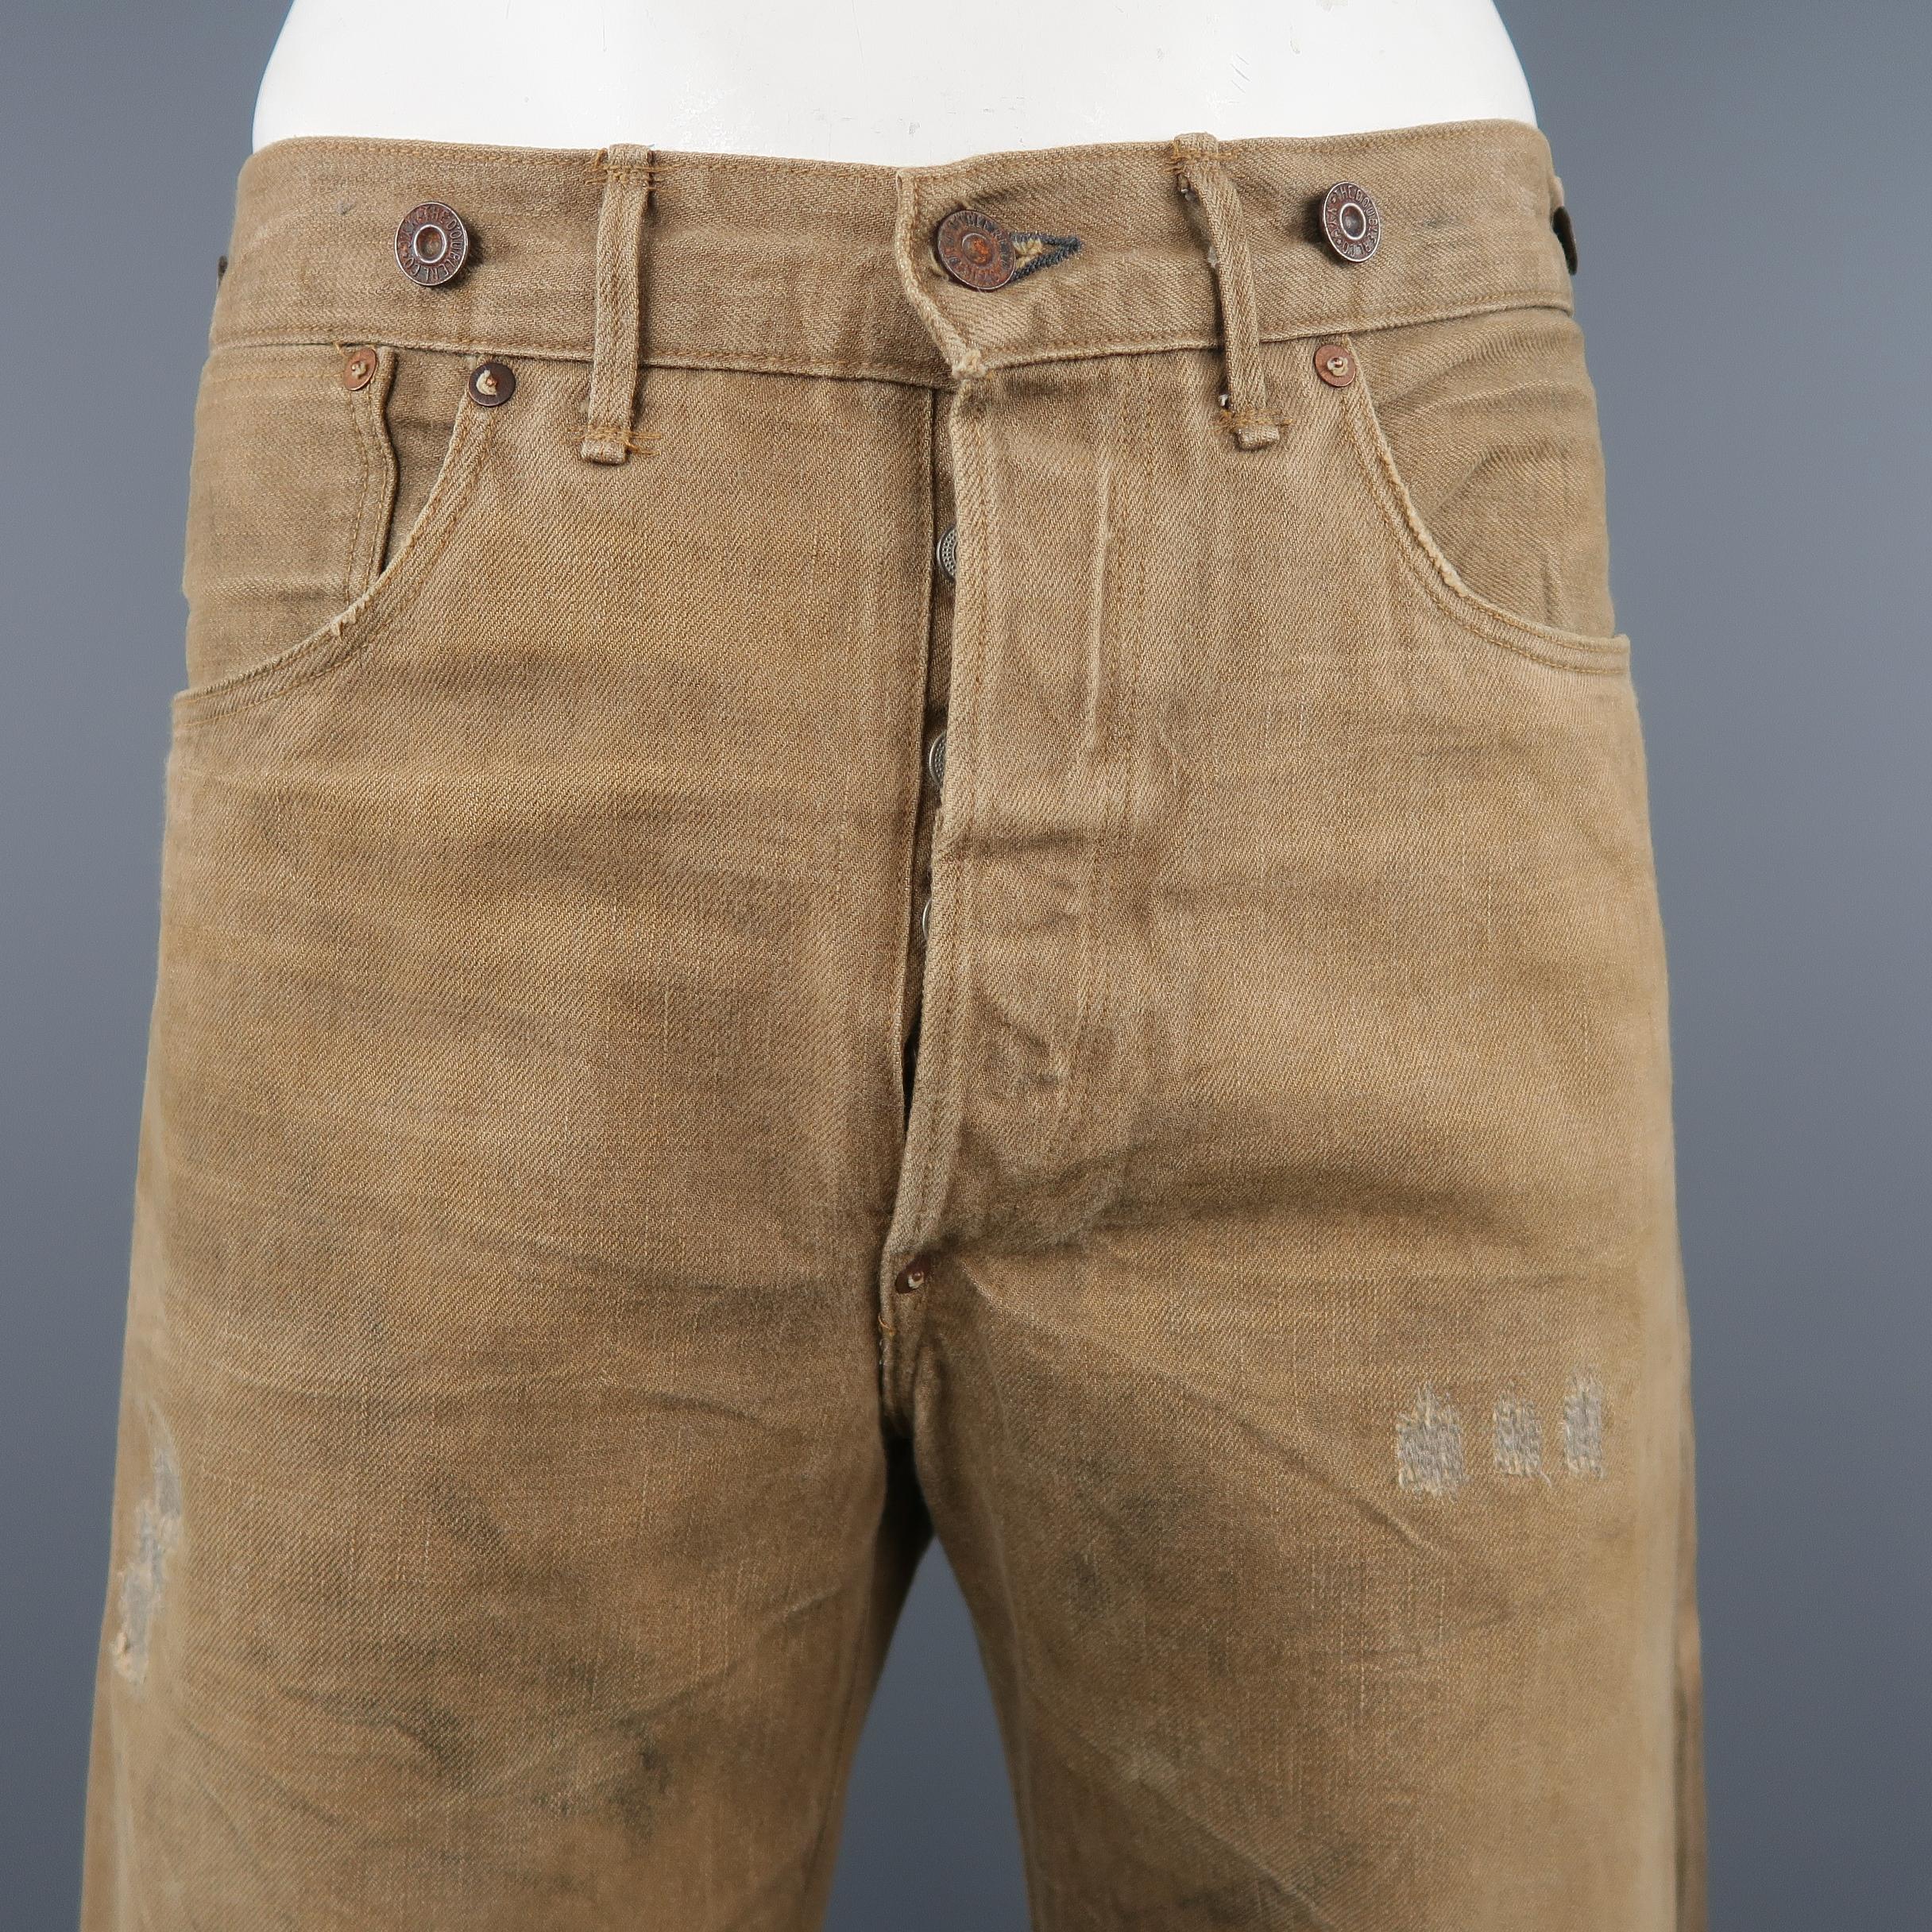 RRL by RALPH LAUREN jeans comes in dirty washed tan beige selvedge denim with all over distressing and embroidery, button fly, back belt, and suspender brace buttons. Made '93. Made in USA. Retail price $490.00.
 
Excellent Pre-Owned